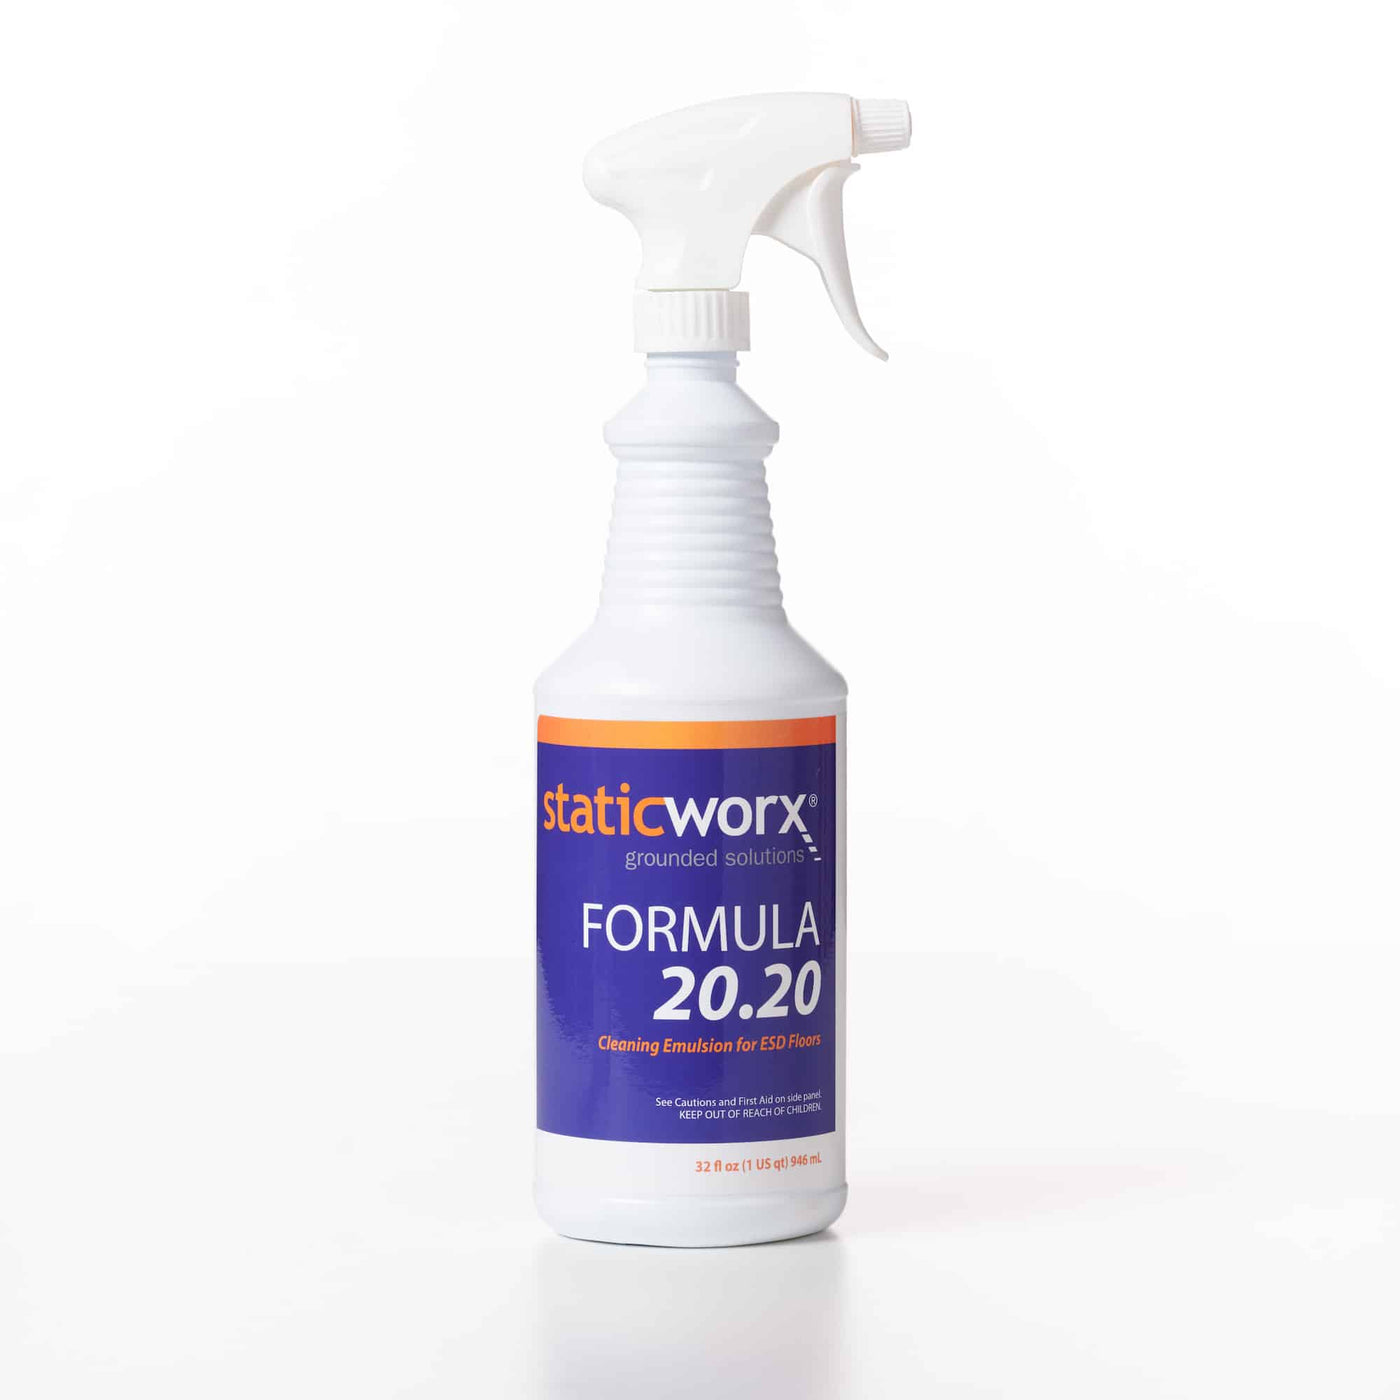 Photo of a bottle of Formula 20.20 cleaning emulsion with a spray top. The white bottle has a blue label with orange trim on the top and the StaticWorx logo underneath. Large white text on the label reads FORMULA 20.20. In smaller orange text underneath: 'Cleaning emulsion for ESD floors' with a safety warning in white, smaller text underneath: "See Cautions and First Aid on side panel. KEEP OUT OF REACH OF CHILDREN."